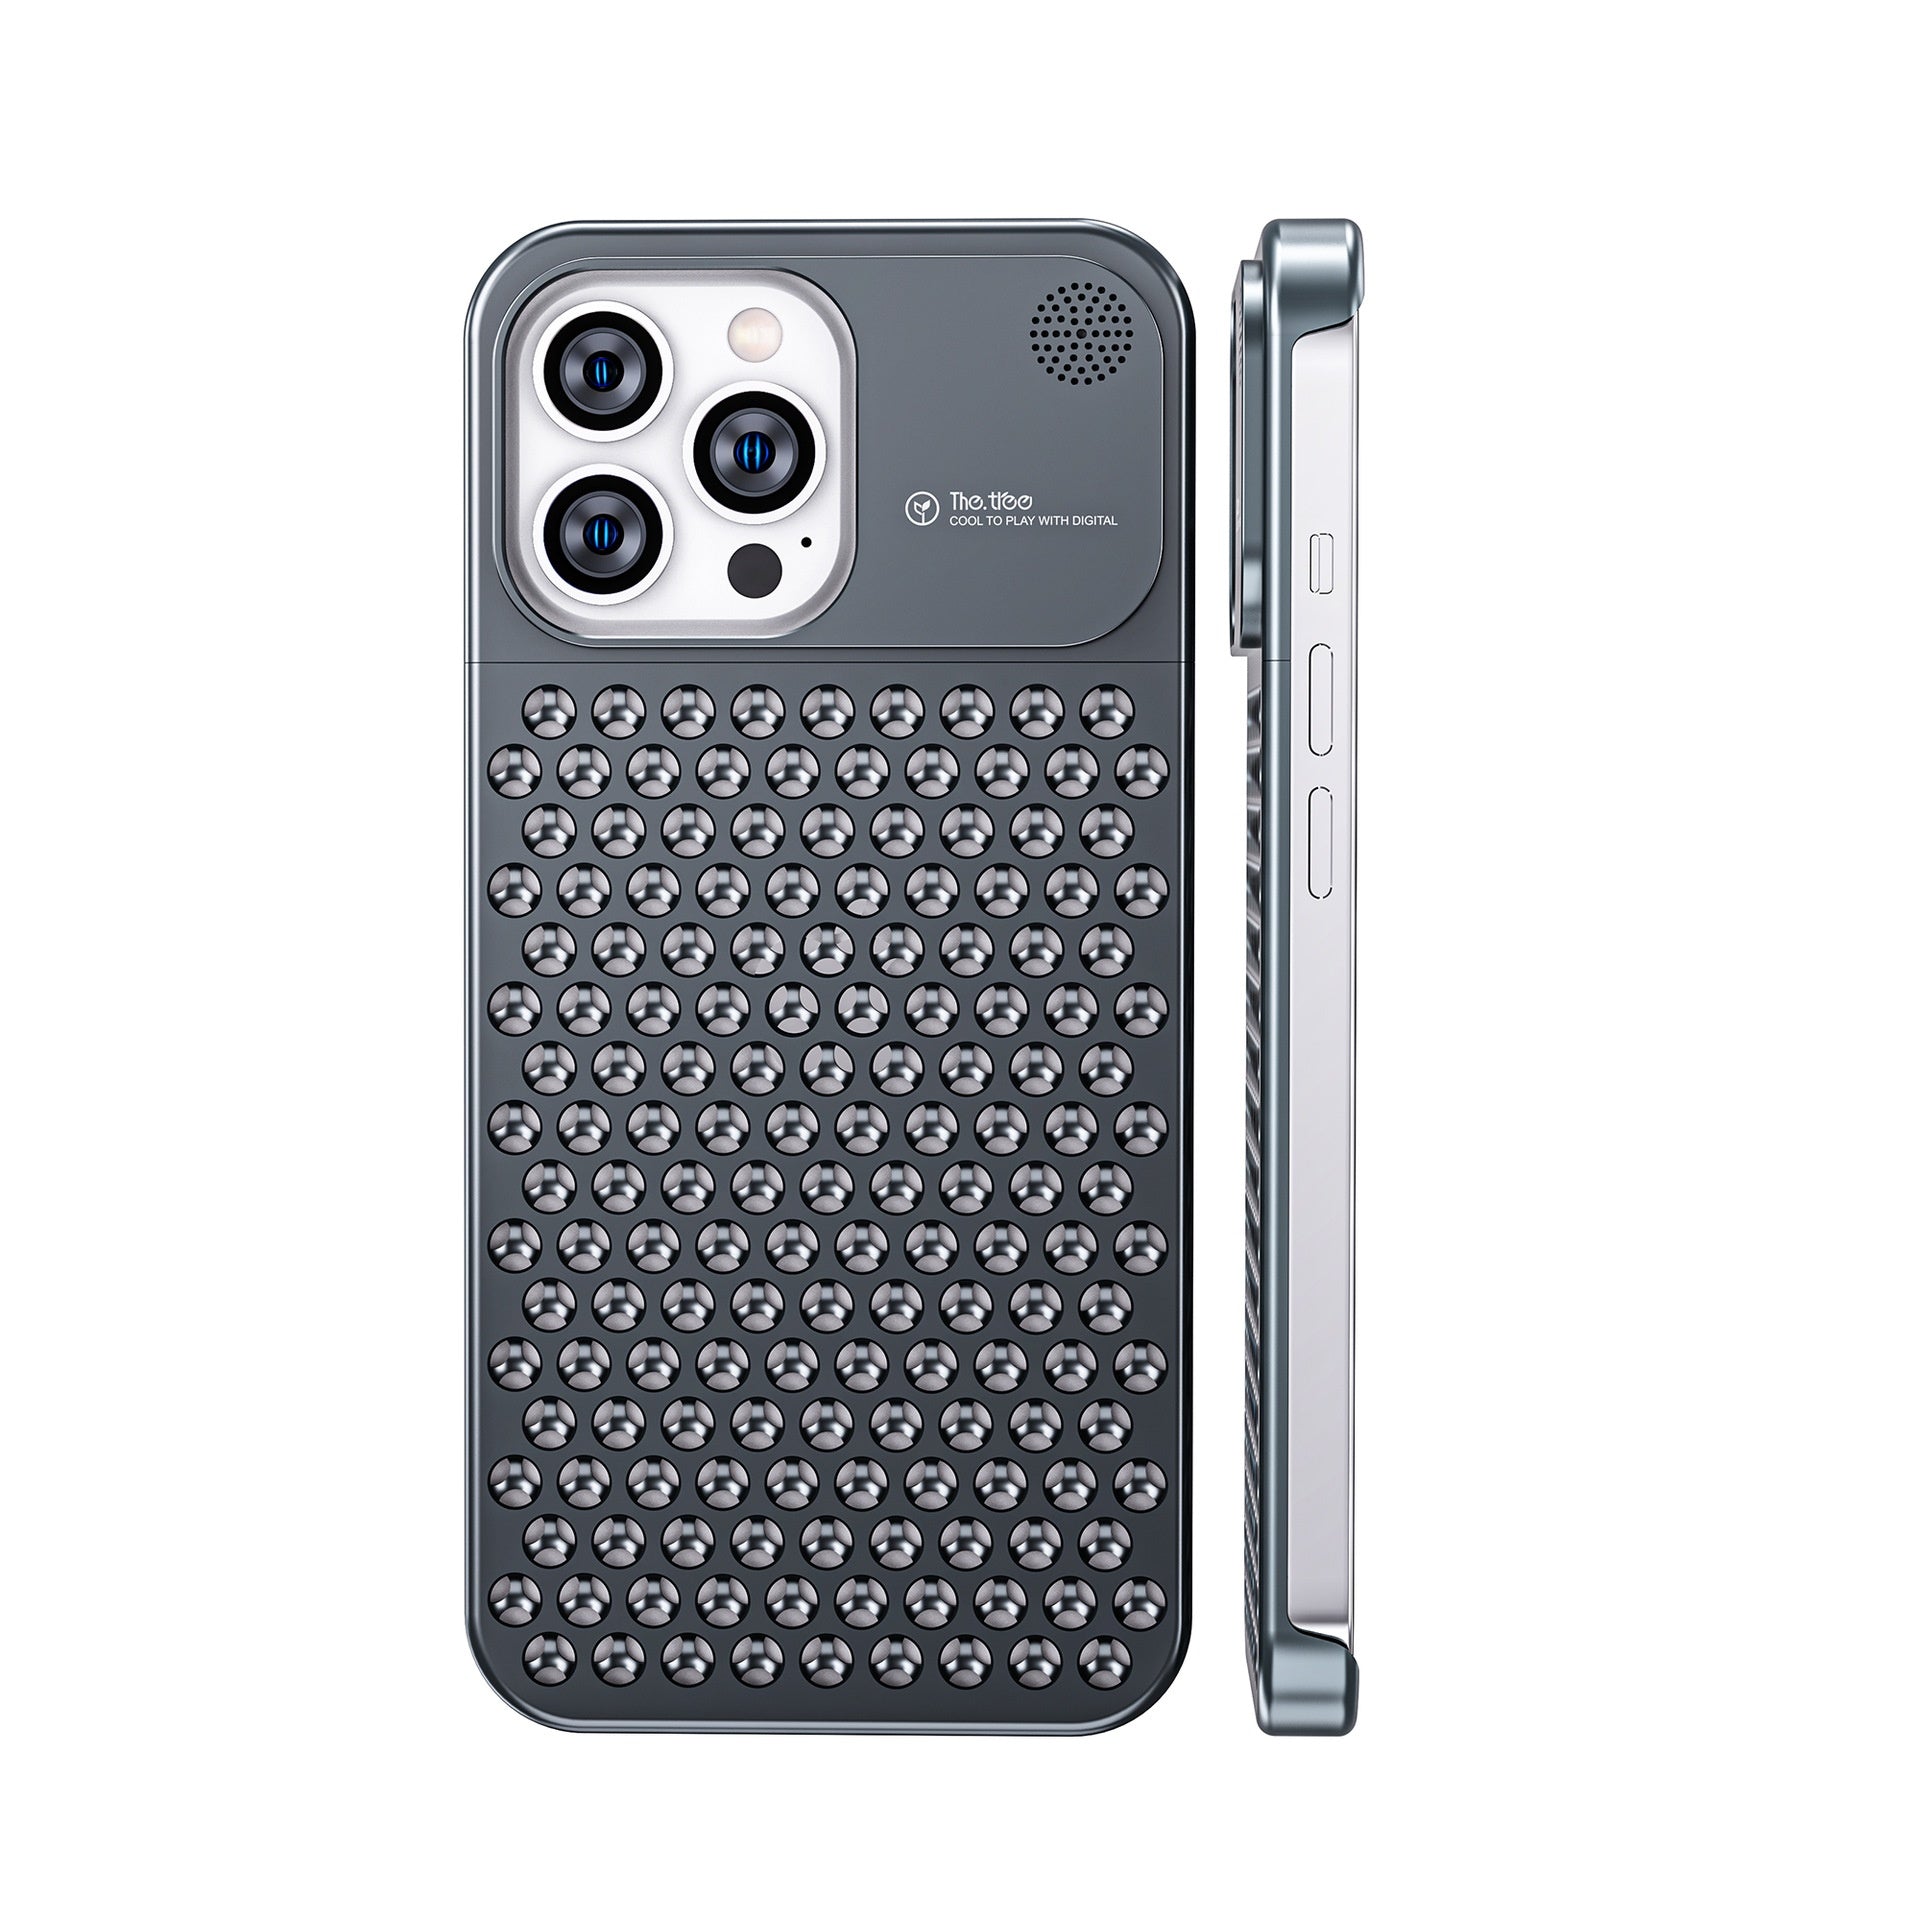 iPhone case made of robust aluminum